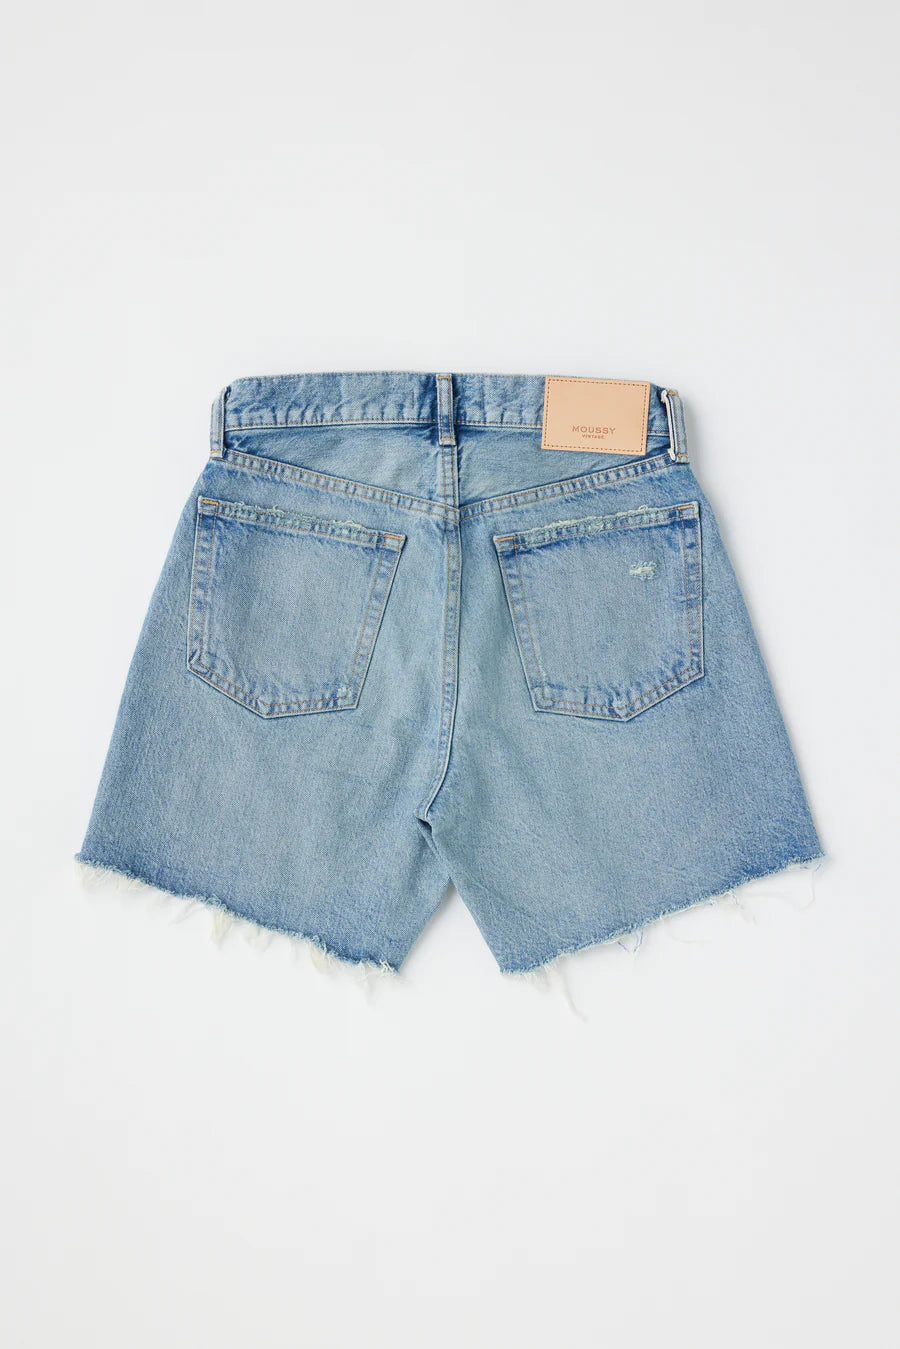 Moussy Vintage Graterford Shorts